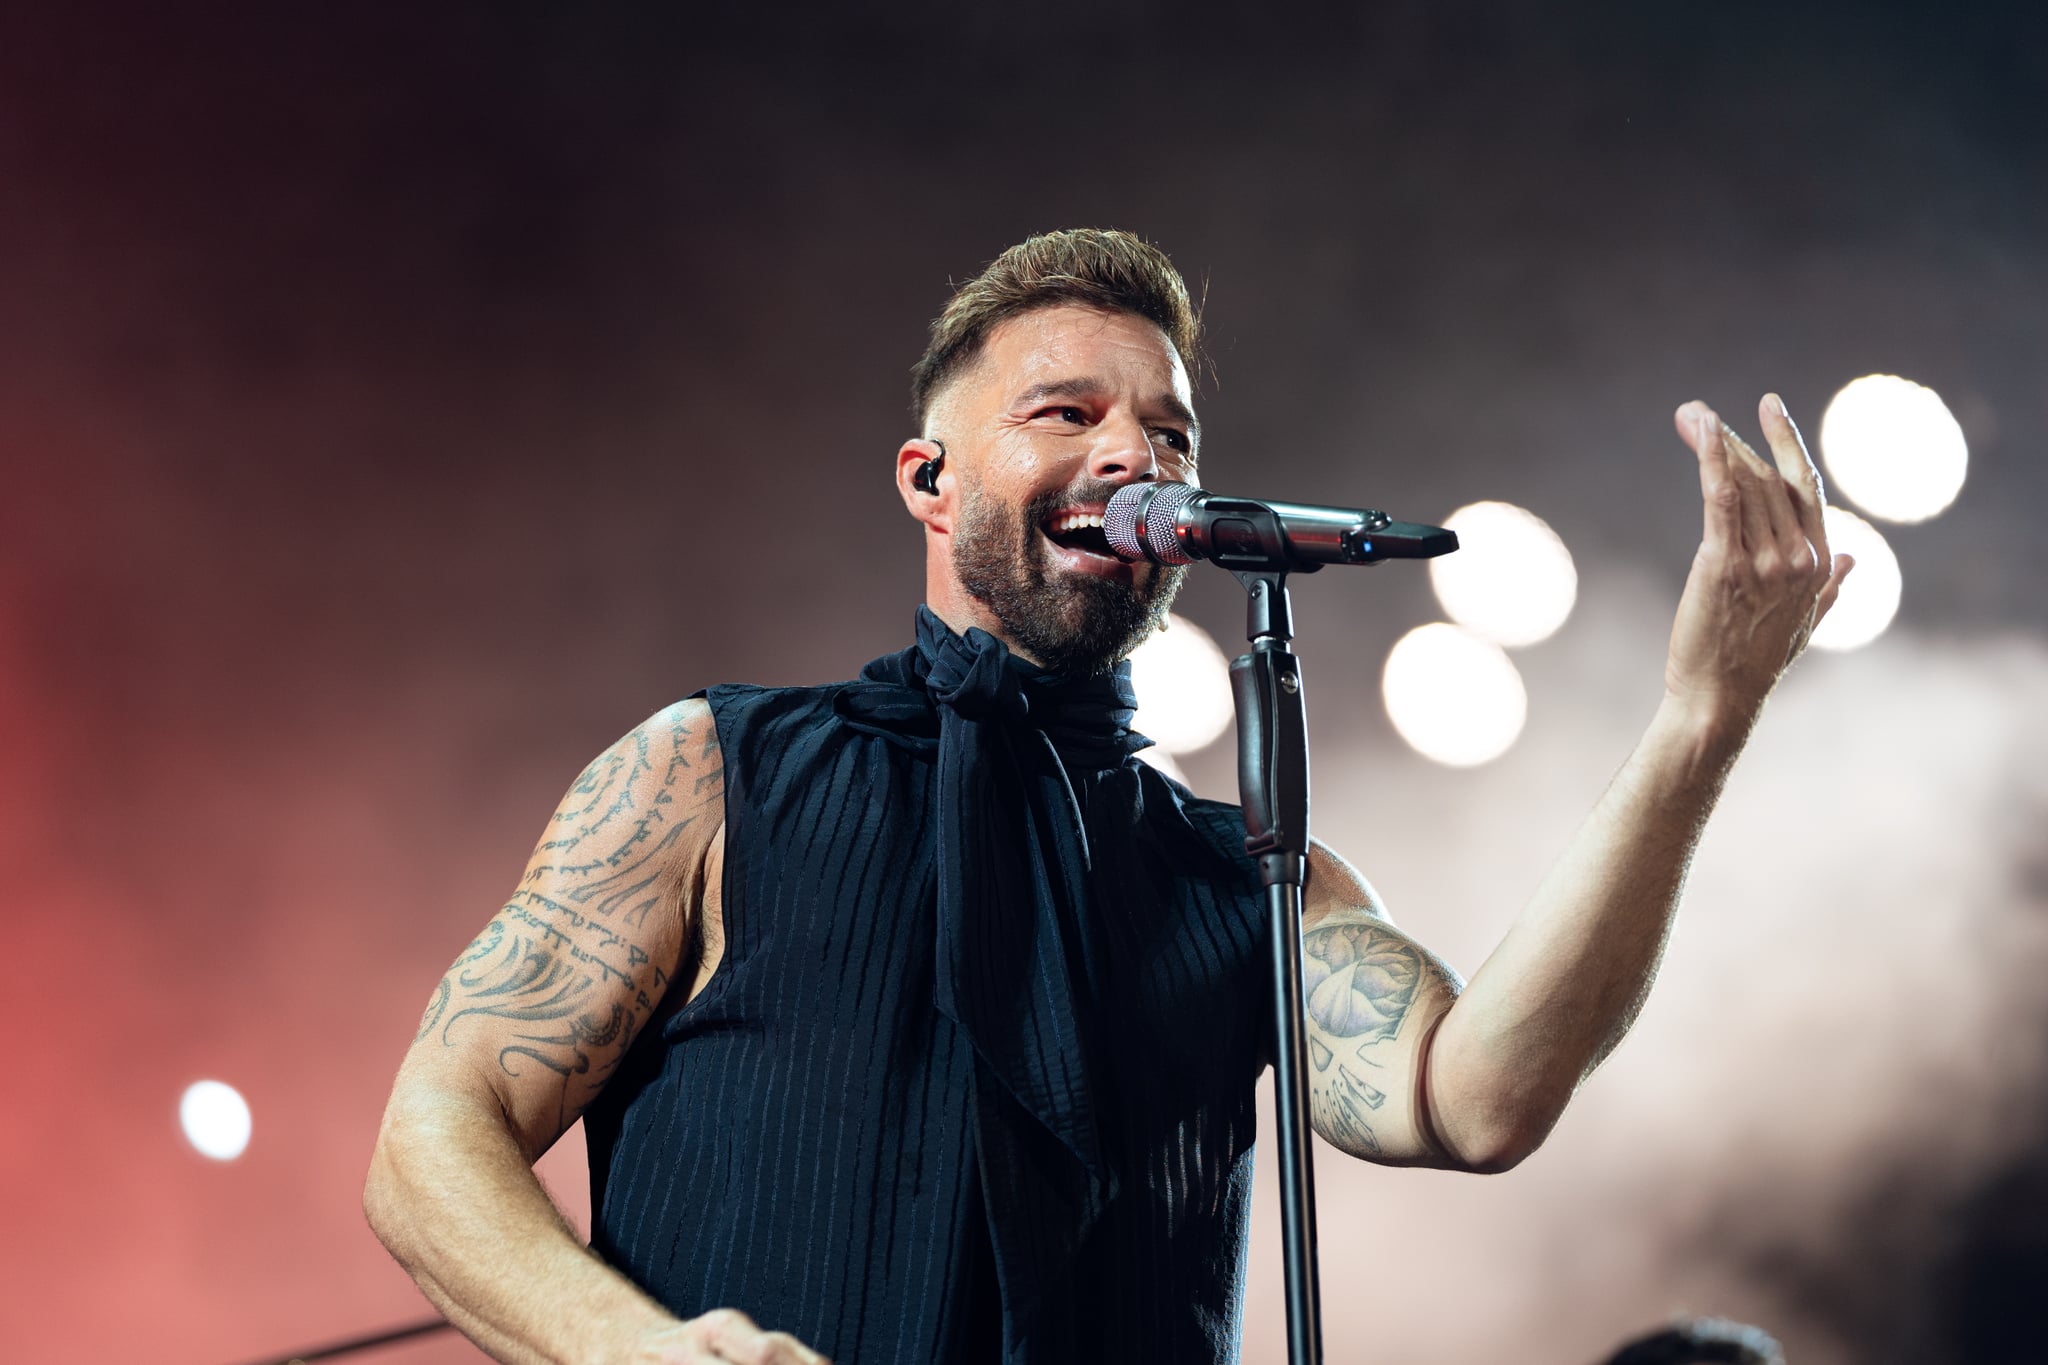 MALAGA, SPAIN - JULY 15: Puerto Rican singer Ricky Martin performs on stage during Starlite Occident 2023 at Cantera de Nagüeles on July 15, 2023 in Malaga, Spain. (Photo by STARLITE/Redferns)